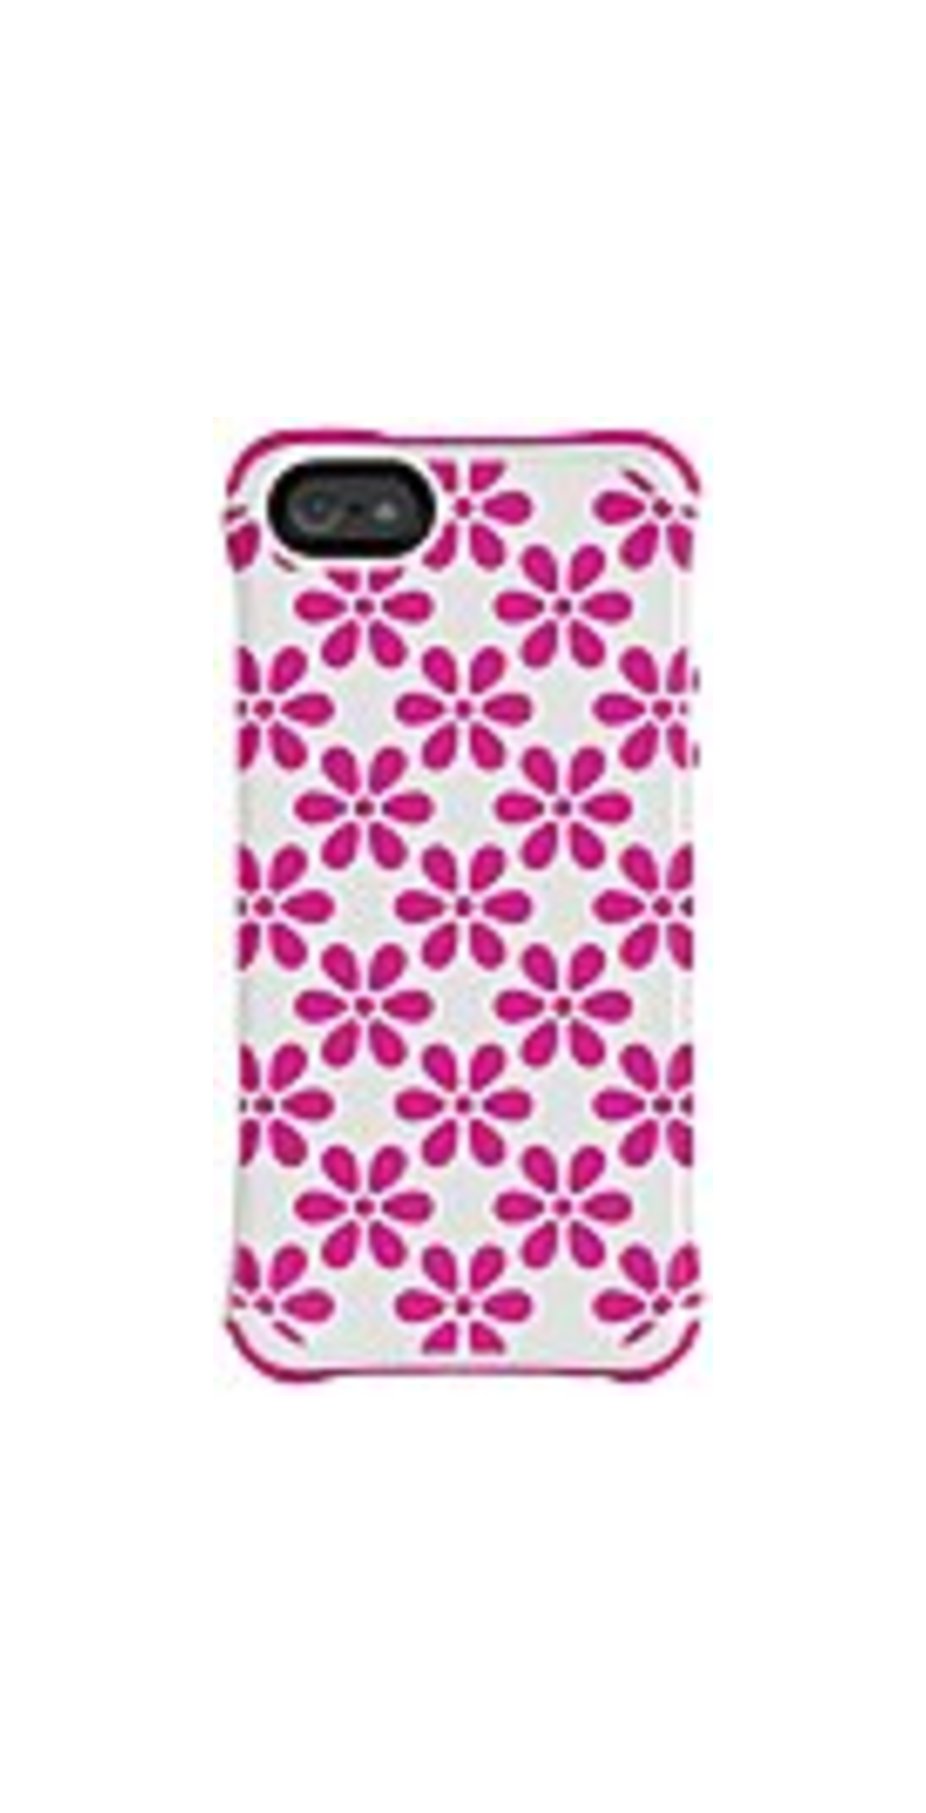 Ballistic IPhone 5 Aspira Series Case - For Apple IPhone Smartphone - Pink And White Flower - Rubberized - Shock Absorbing - Plastic, Thermoplastic Po